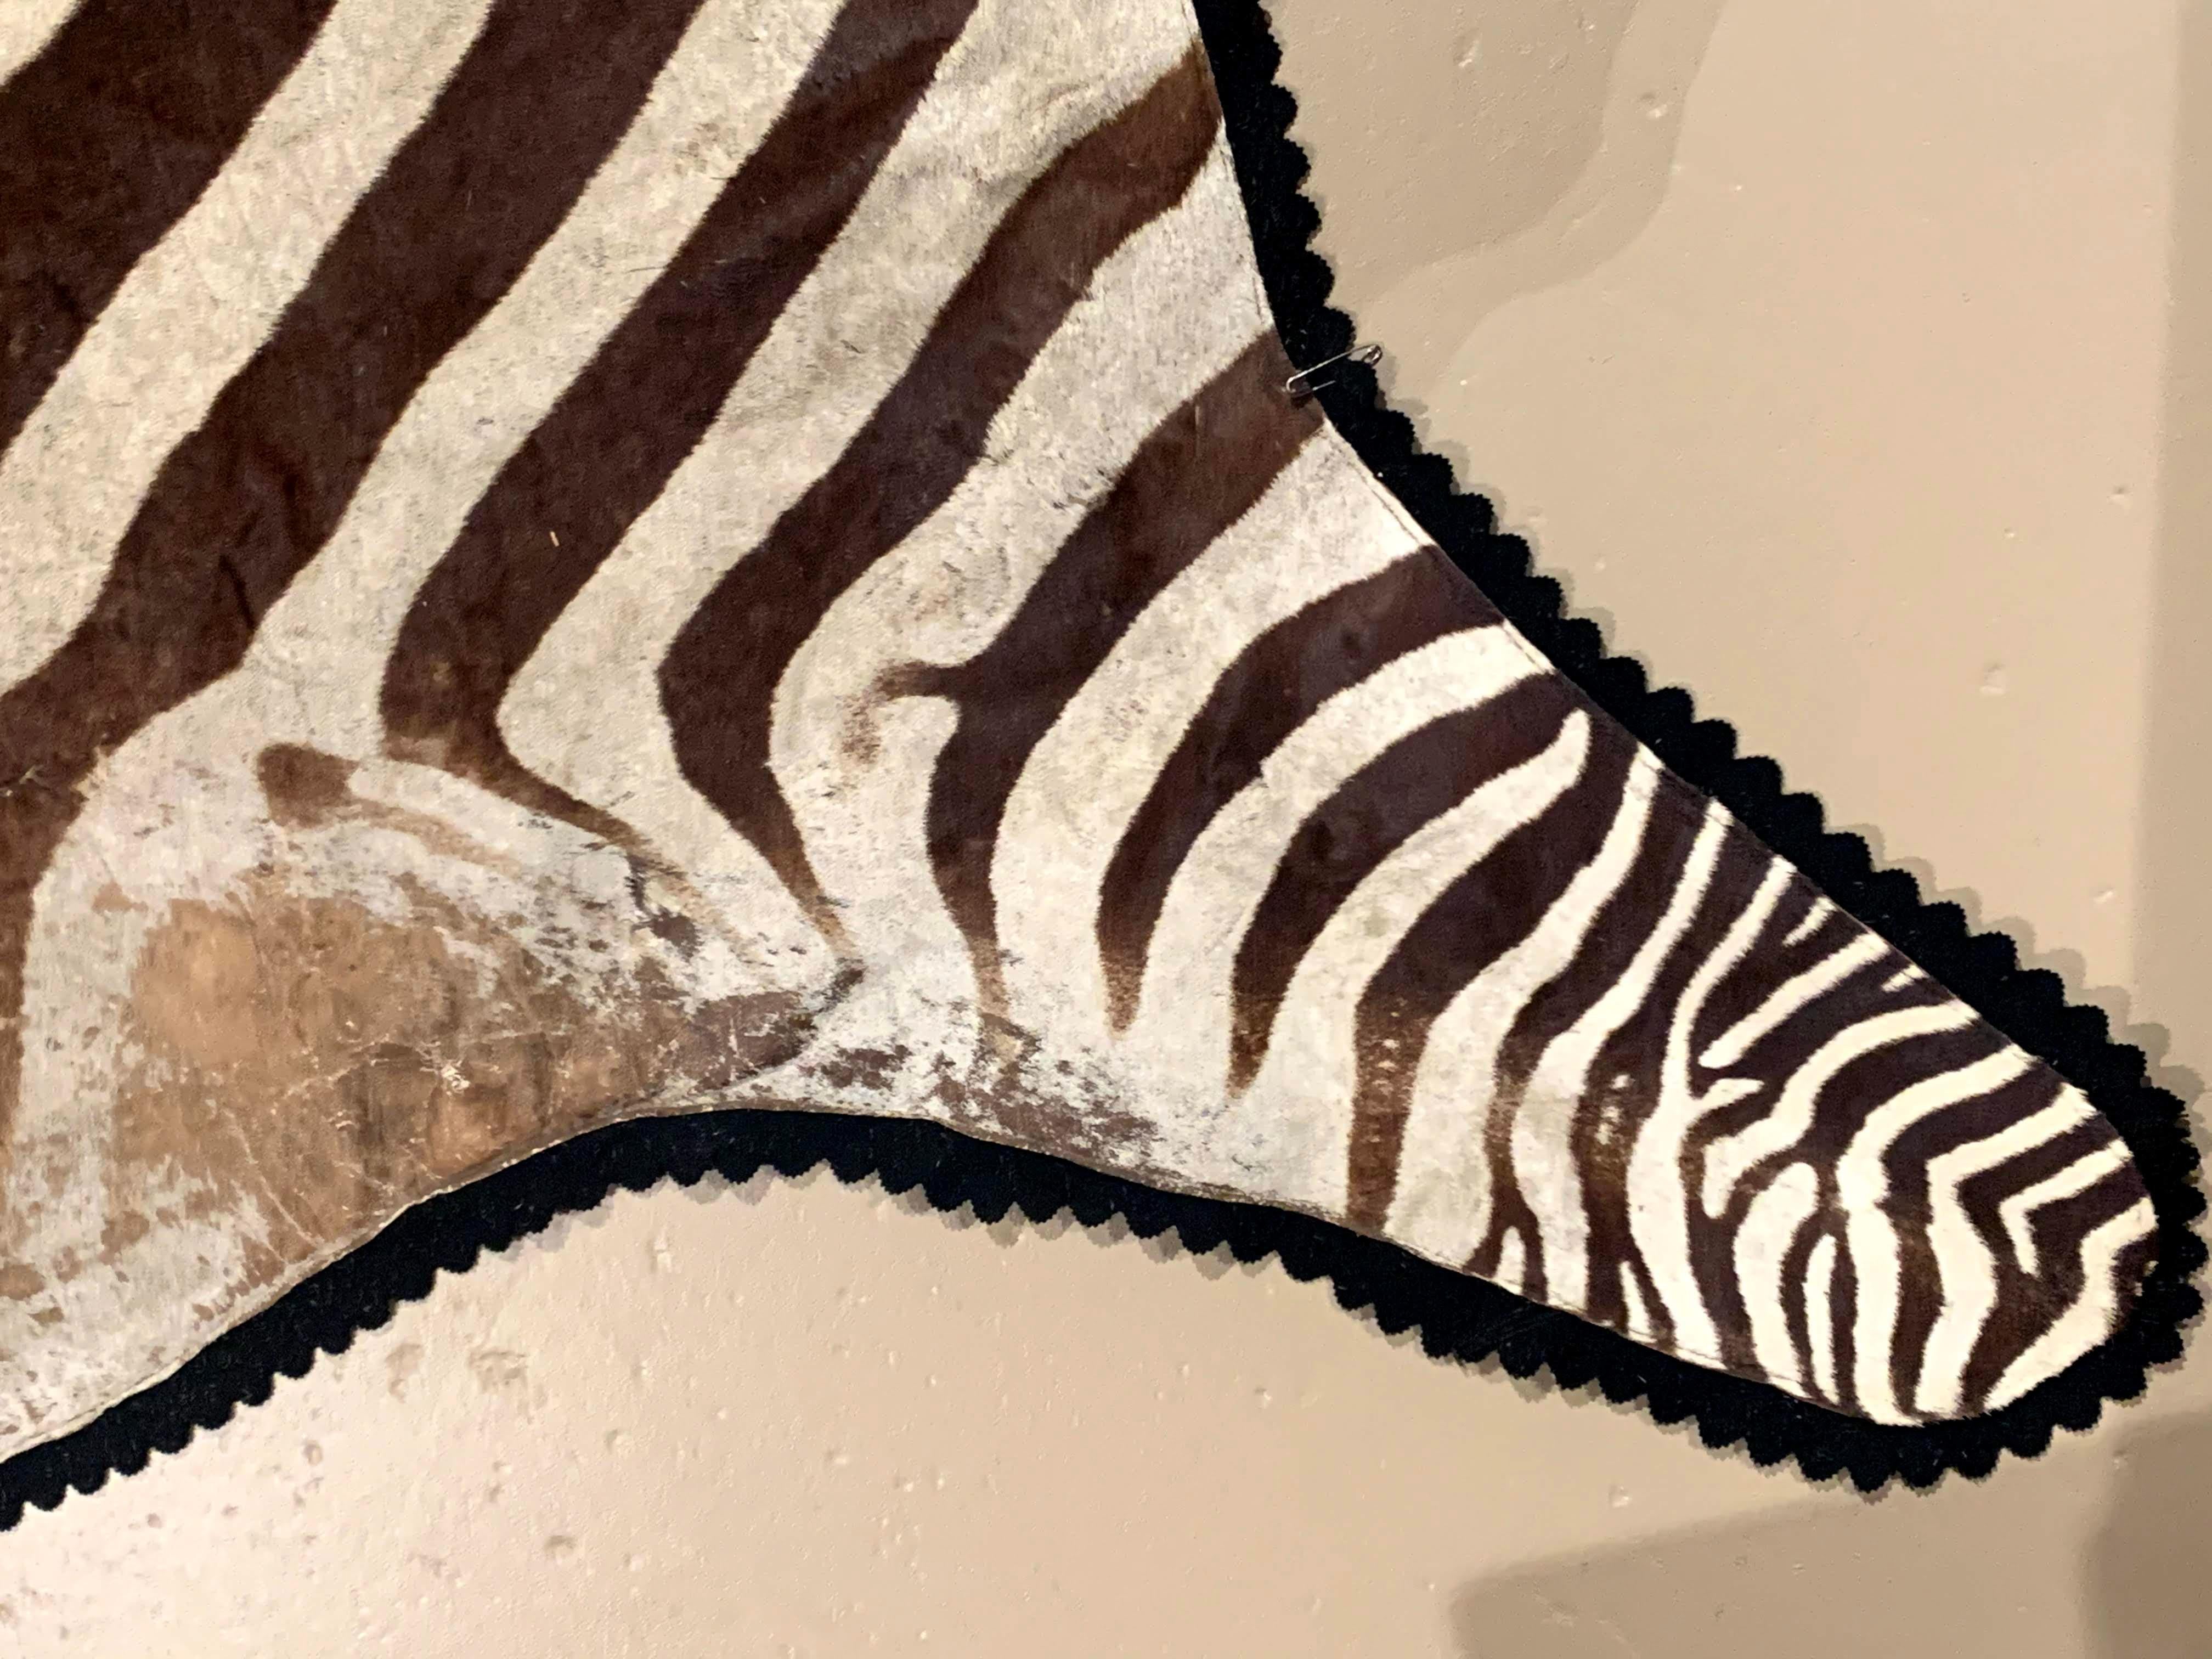 A fine vintage zebra skin rug on black felt conforming base, with makers tag “Jonas Brothers, Taxidermy Studios, Mt. Vernon, NY”. Good overall condition, with some areas of wear. Probably dates to the early to mid-20th century. Dimensions: 93 in H x